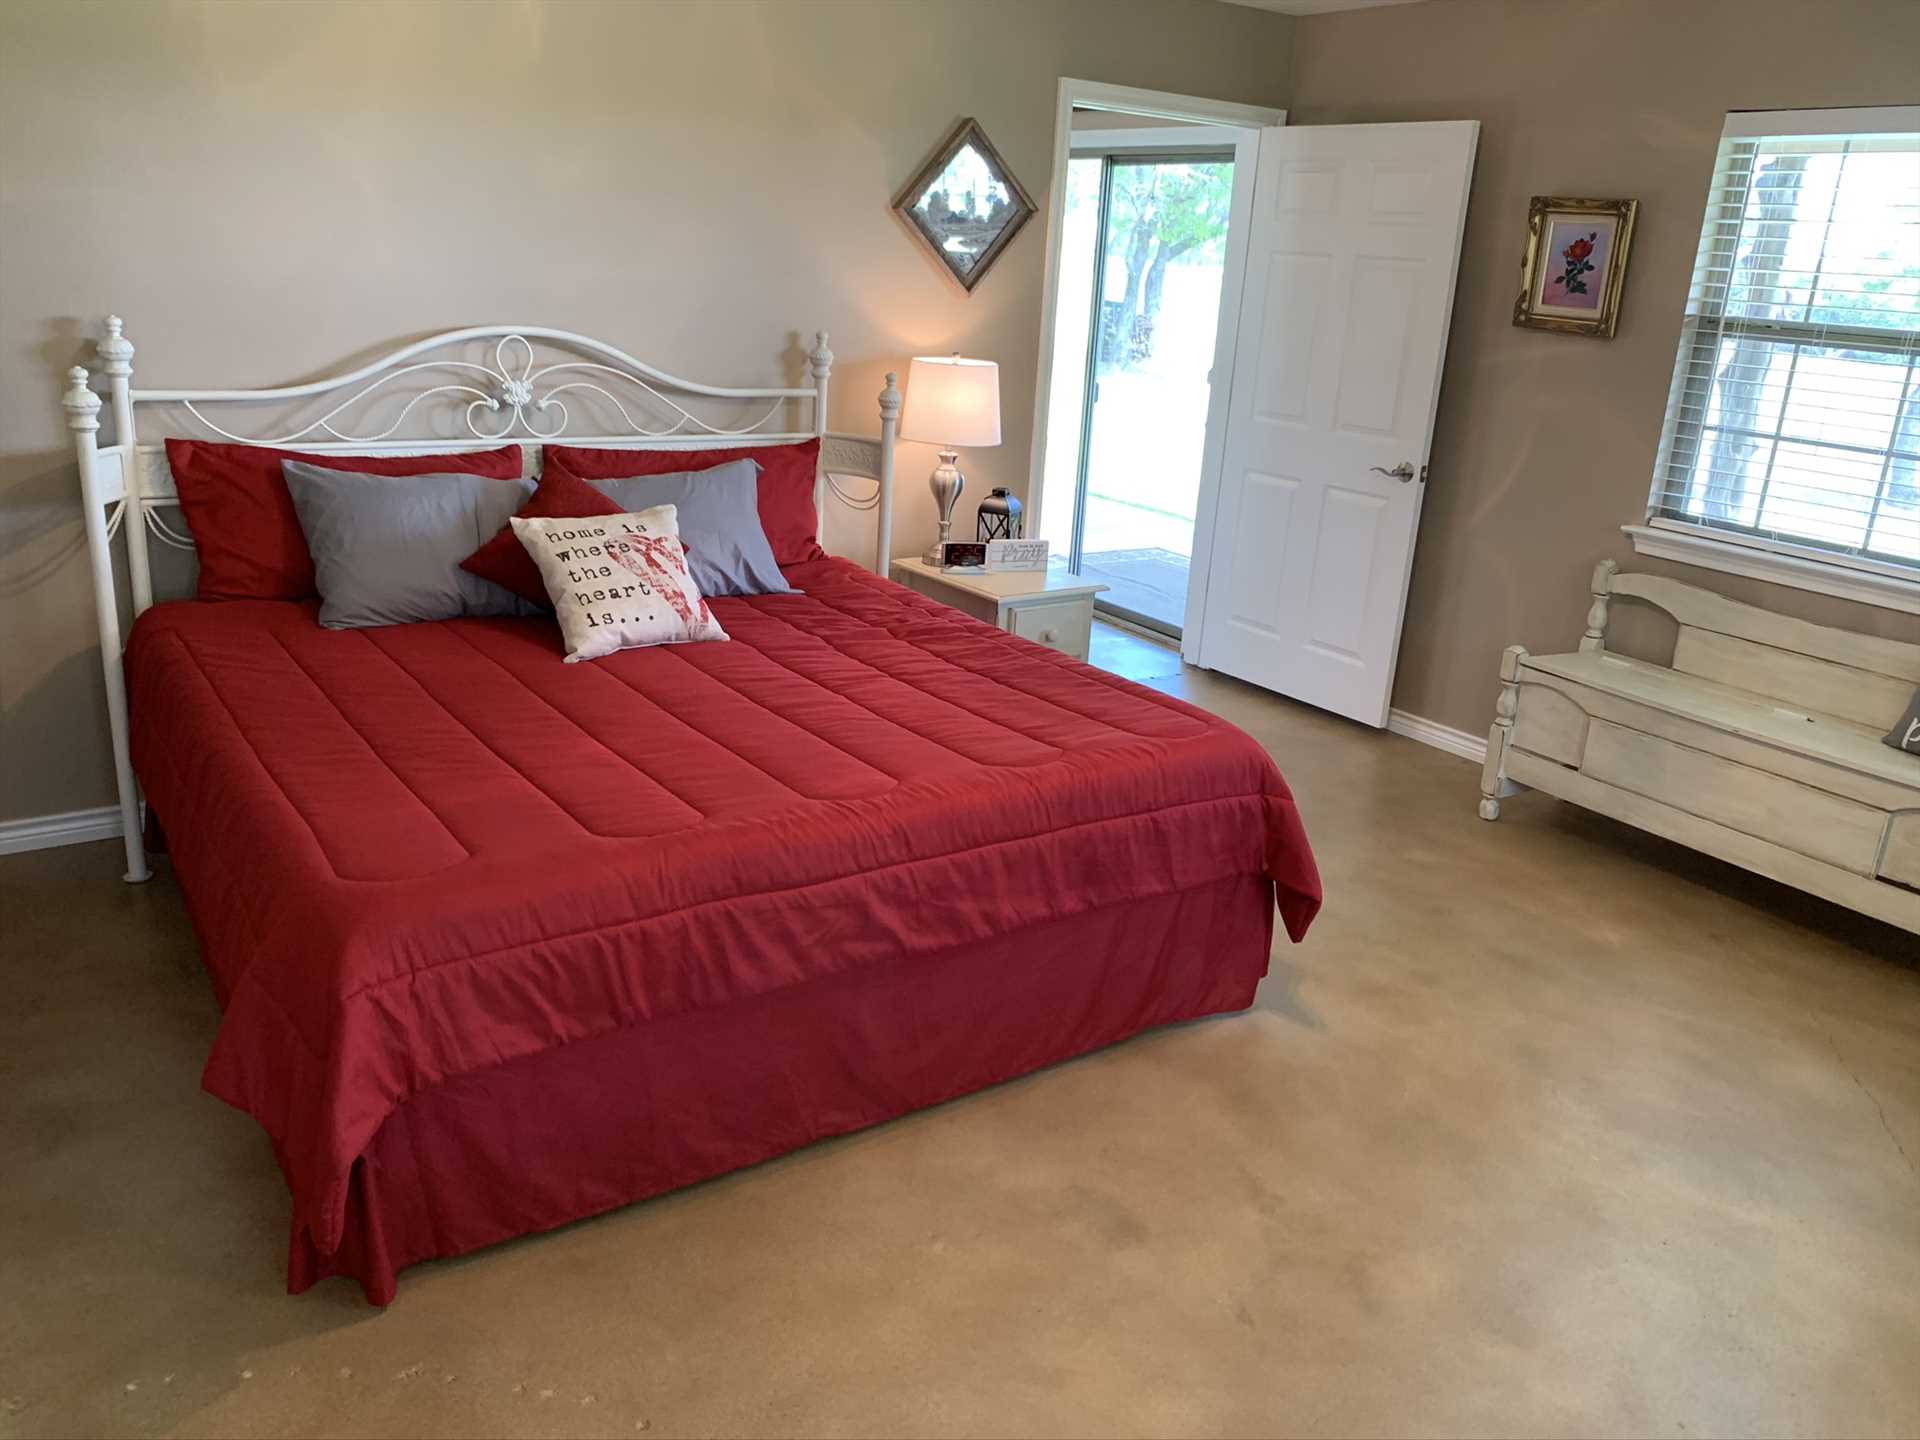                                                 The highlight of the third bedroom here is a plush king-sized bed, draped with clean and warm linens-as are all the beds here!